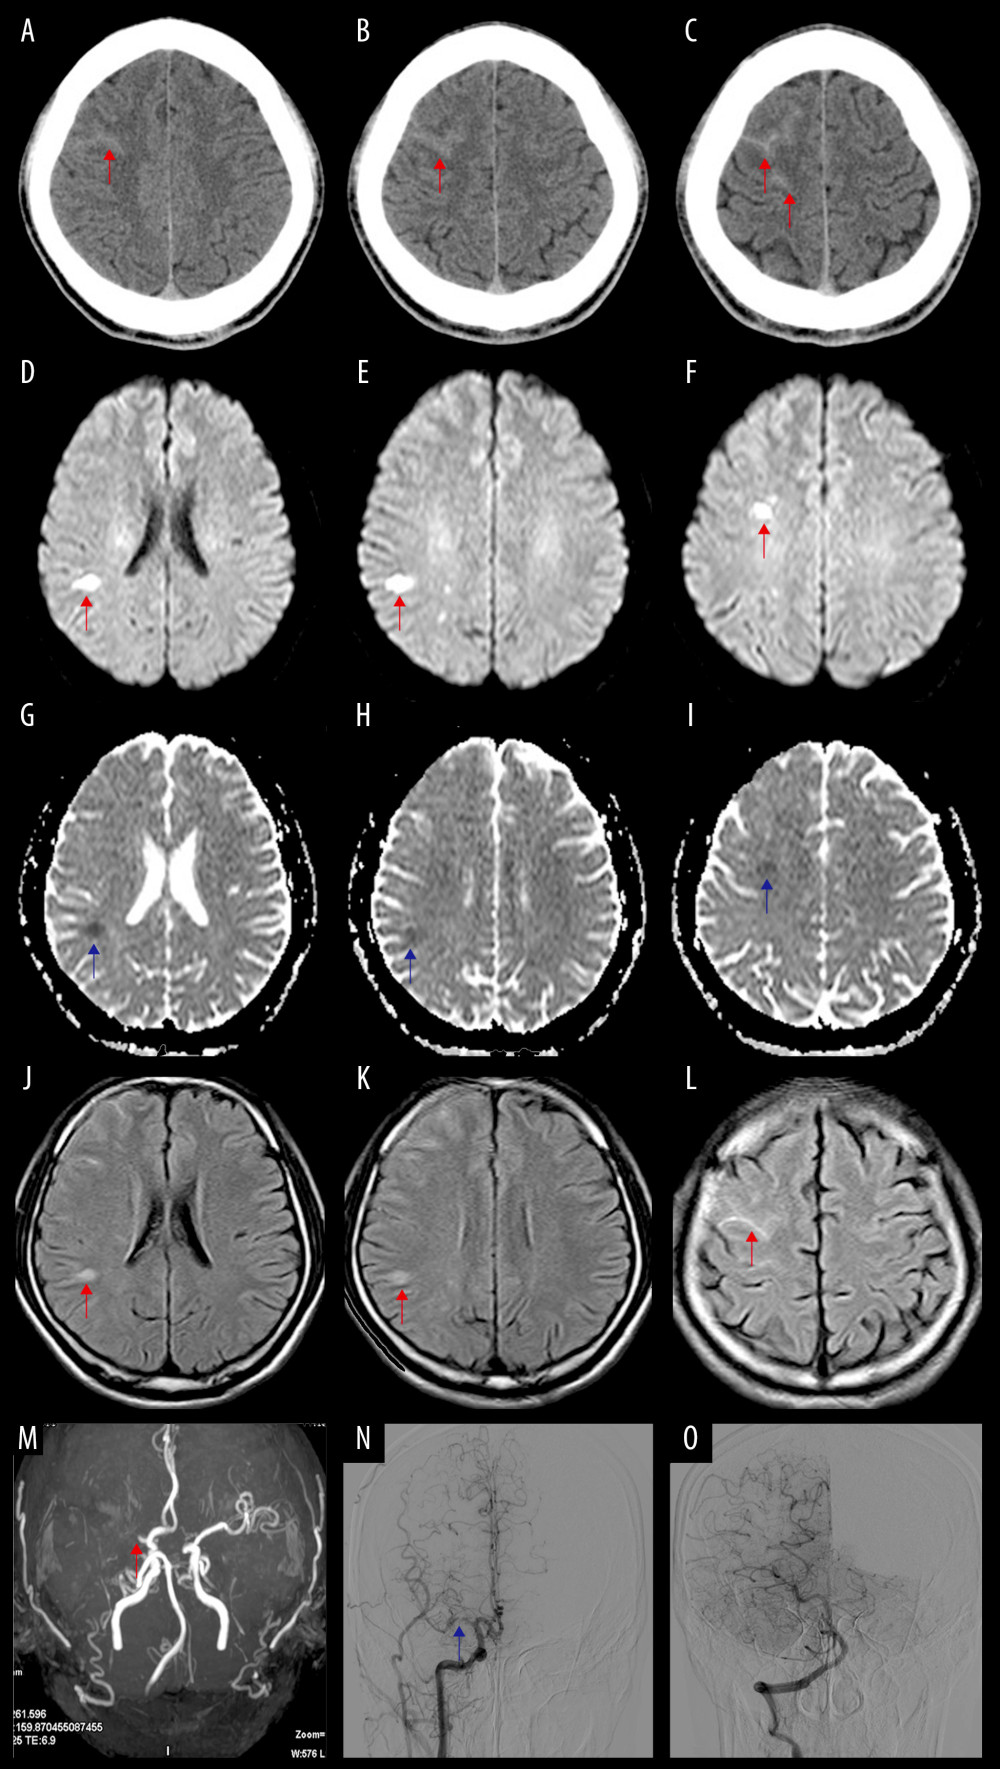 (A–C) Axial brain CT shows cortical subarachnoid hemorrhage in the right superior frontal sulcus (red arrow). (D–F) Axial diffusion-weighted image (DWI) shows acute ischemic infarction in the right frontal lobe and corona radiata (red arrow). (G–I) The apparent diffusion coefficient (ADC) shows acute ischemic infarction in the same location (right frontal lobe and corona radiata) (blue arrow). (J, K) Axial FLAIR shows acute ischemic infarction in the right frontal lobe (red arrow). (L) Axial FLAIR shows cSAH in the right superior frontal sulcus (red arrow). (M) Discloses the M1-segment of the right middle cerebral artery (MCA) occlusion (red arrow), a bilateral anterior cerebral artery from the right internal carotid artery (RICA), fetal posterior cerebral artery (PCA), and a hypoplastic left vertebral artery. (N, O) DSA shows severe stenosis in the M1-segment of the right MCA (N, blue arrow), and shows the normal cerebral arteries in the right posterior circulation (O).